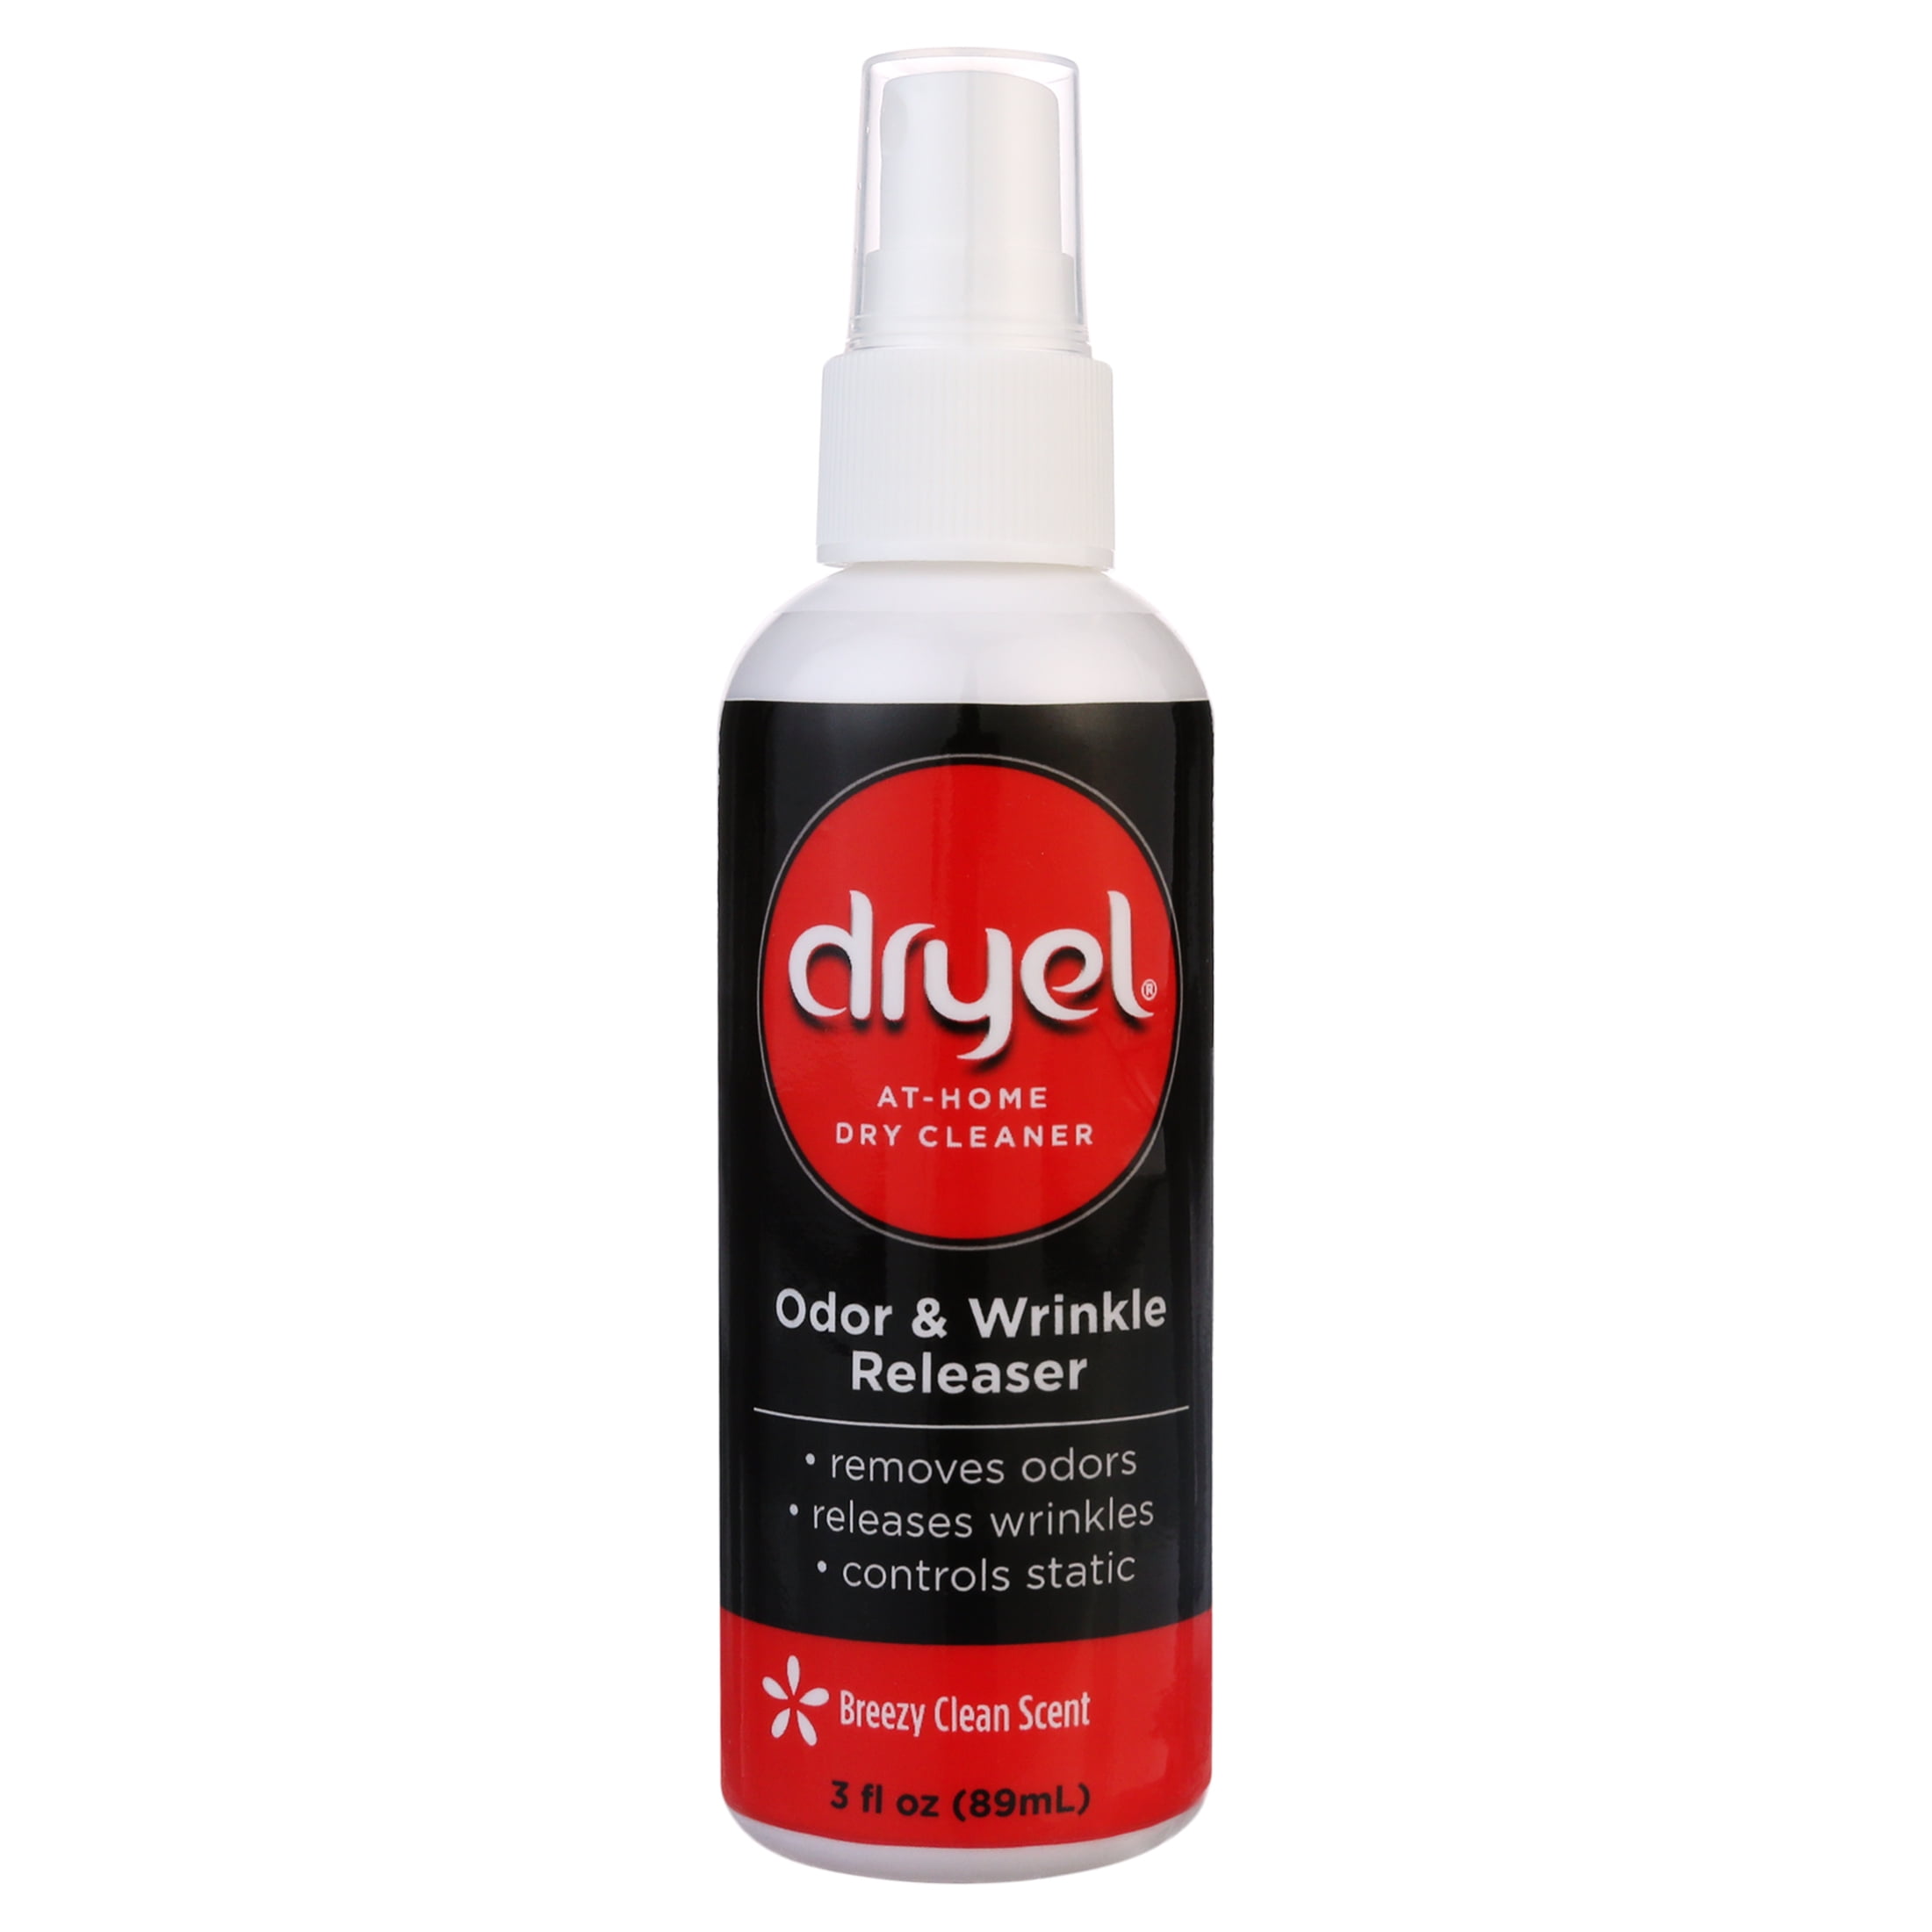  dryel at-Home Dry Cleaner Refill Kit - 8 Loads,CRB